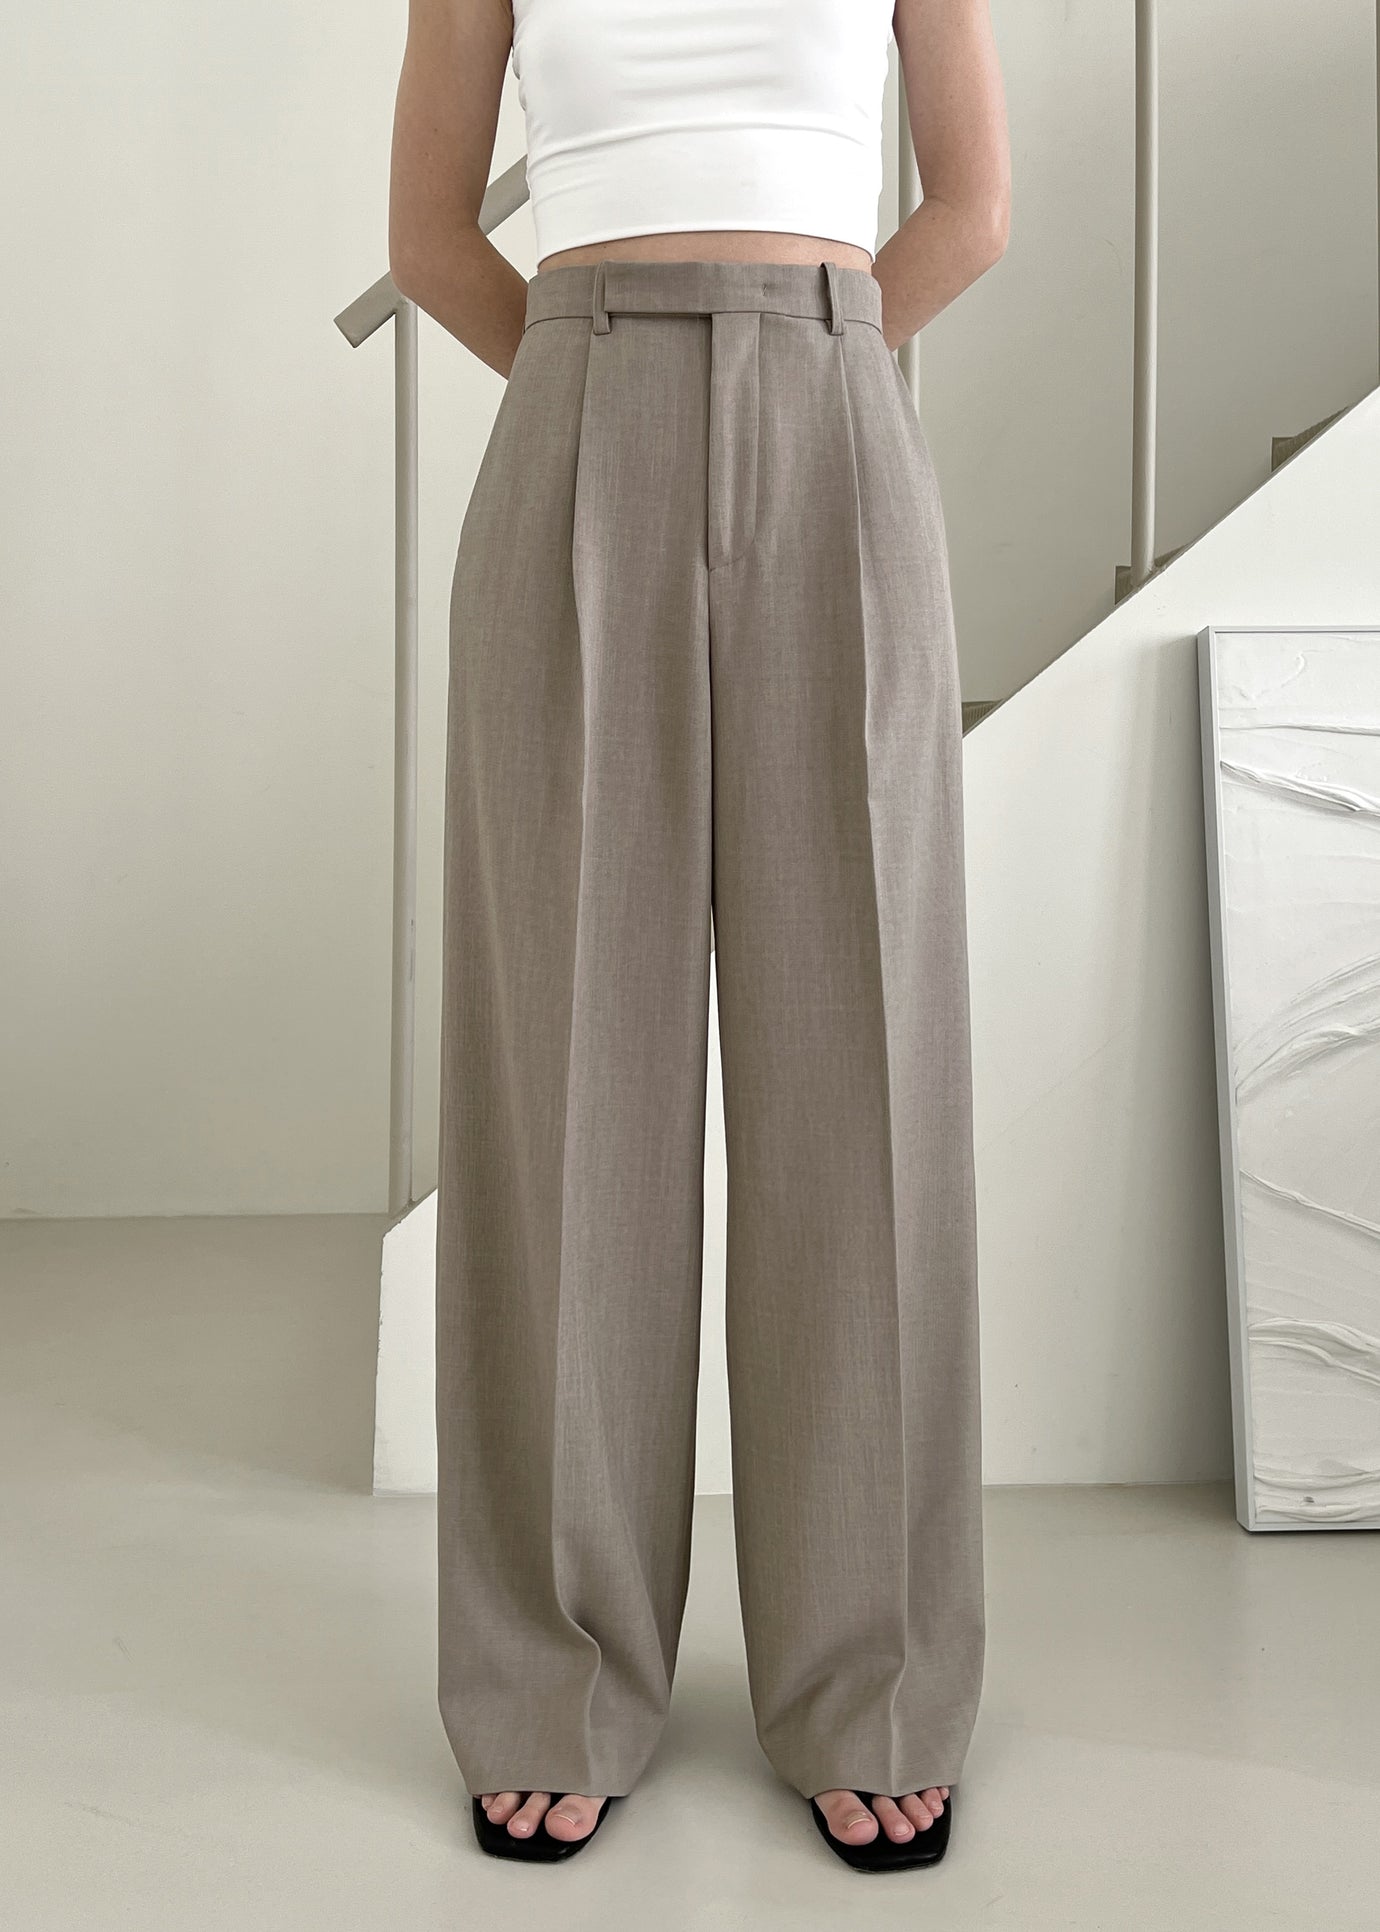 Nessi Pintuck Trousers - Taupe